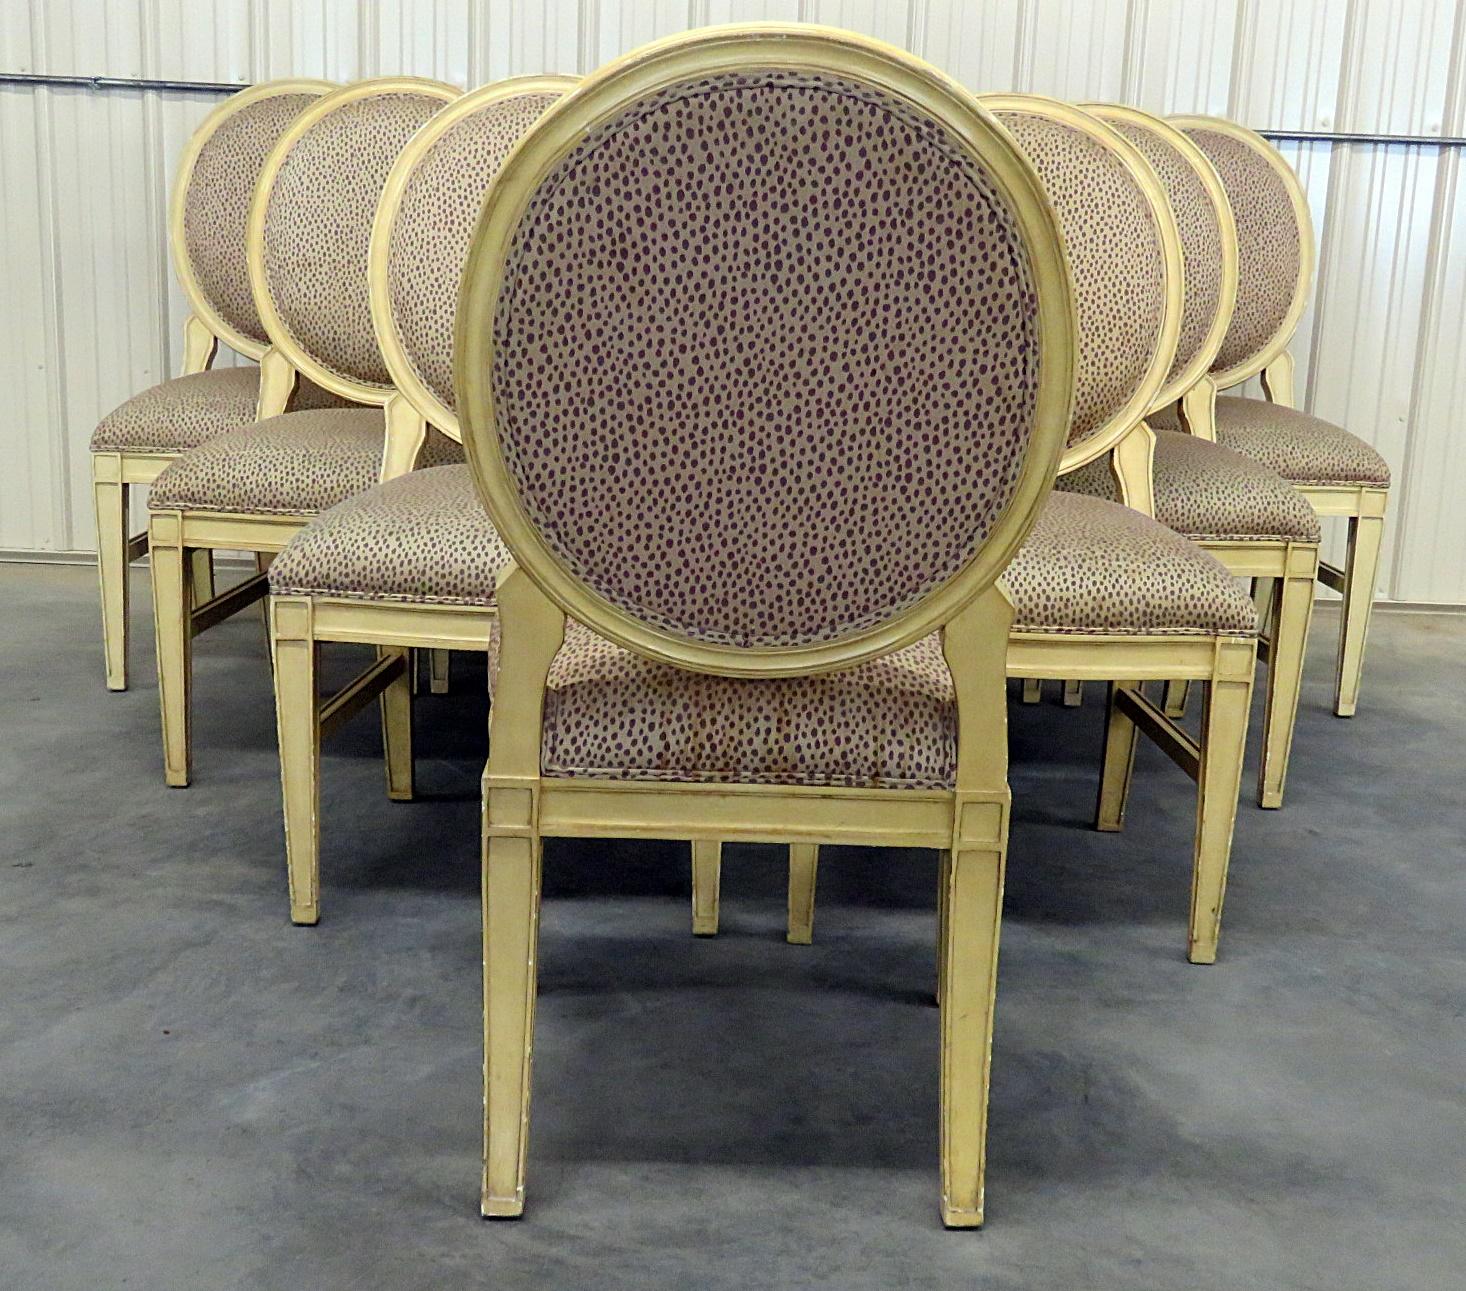 Louis XIV Set of 10 Painted Maison Jansen Style Dining Side Chairs in the Directoire Style